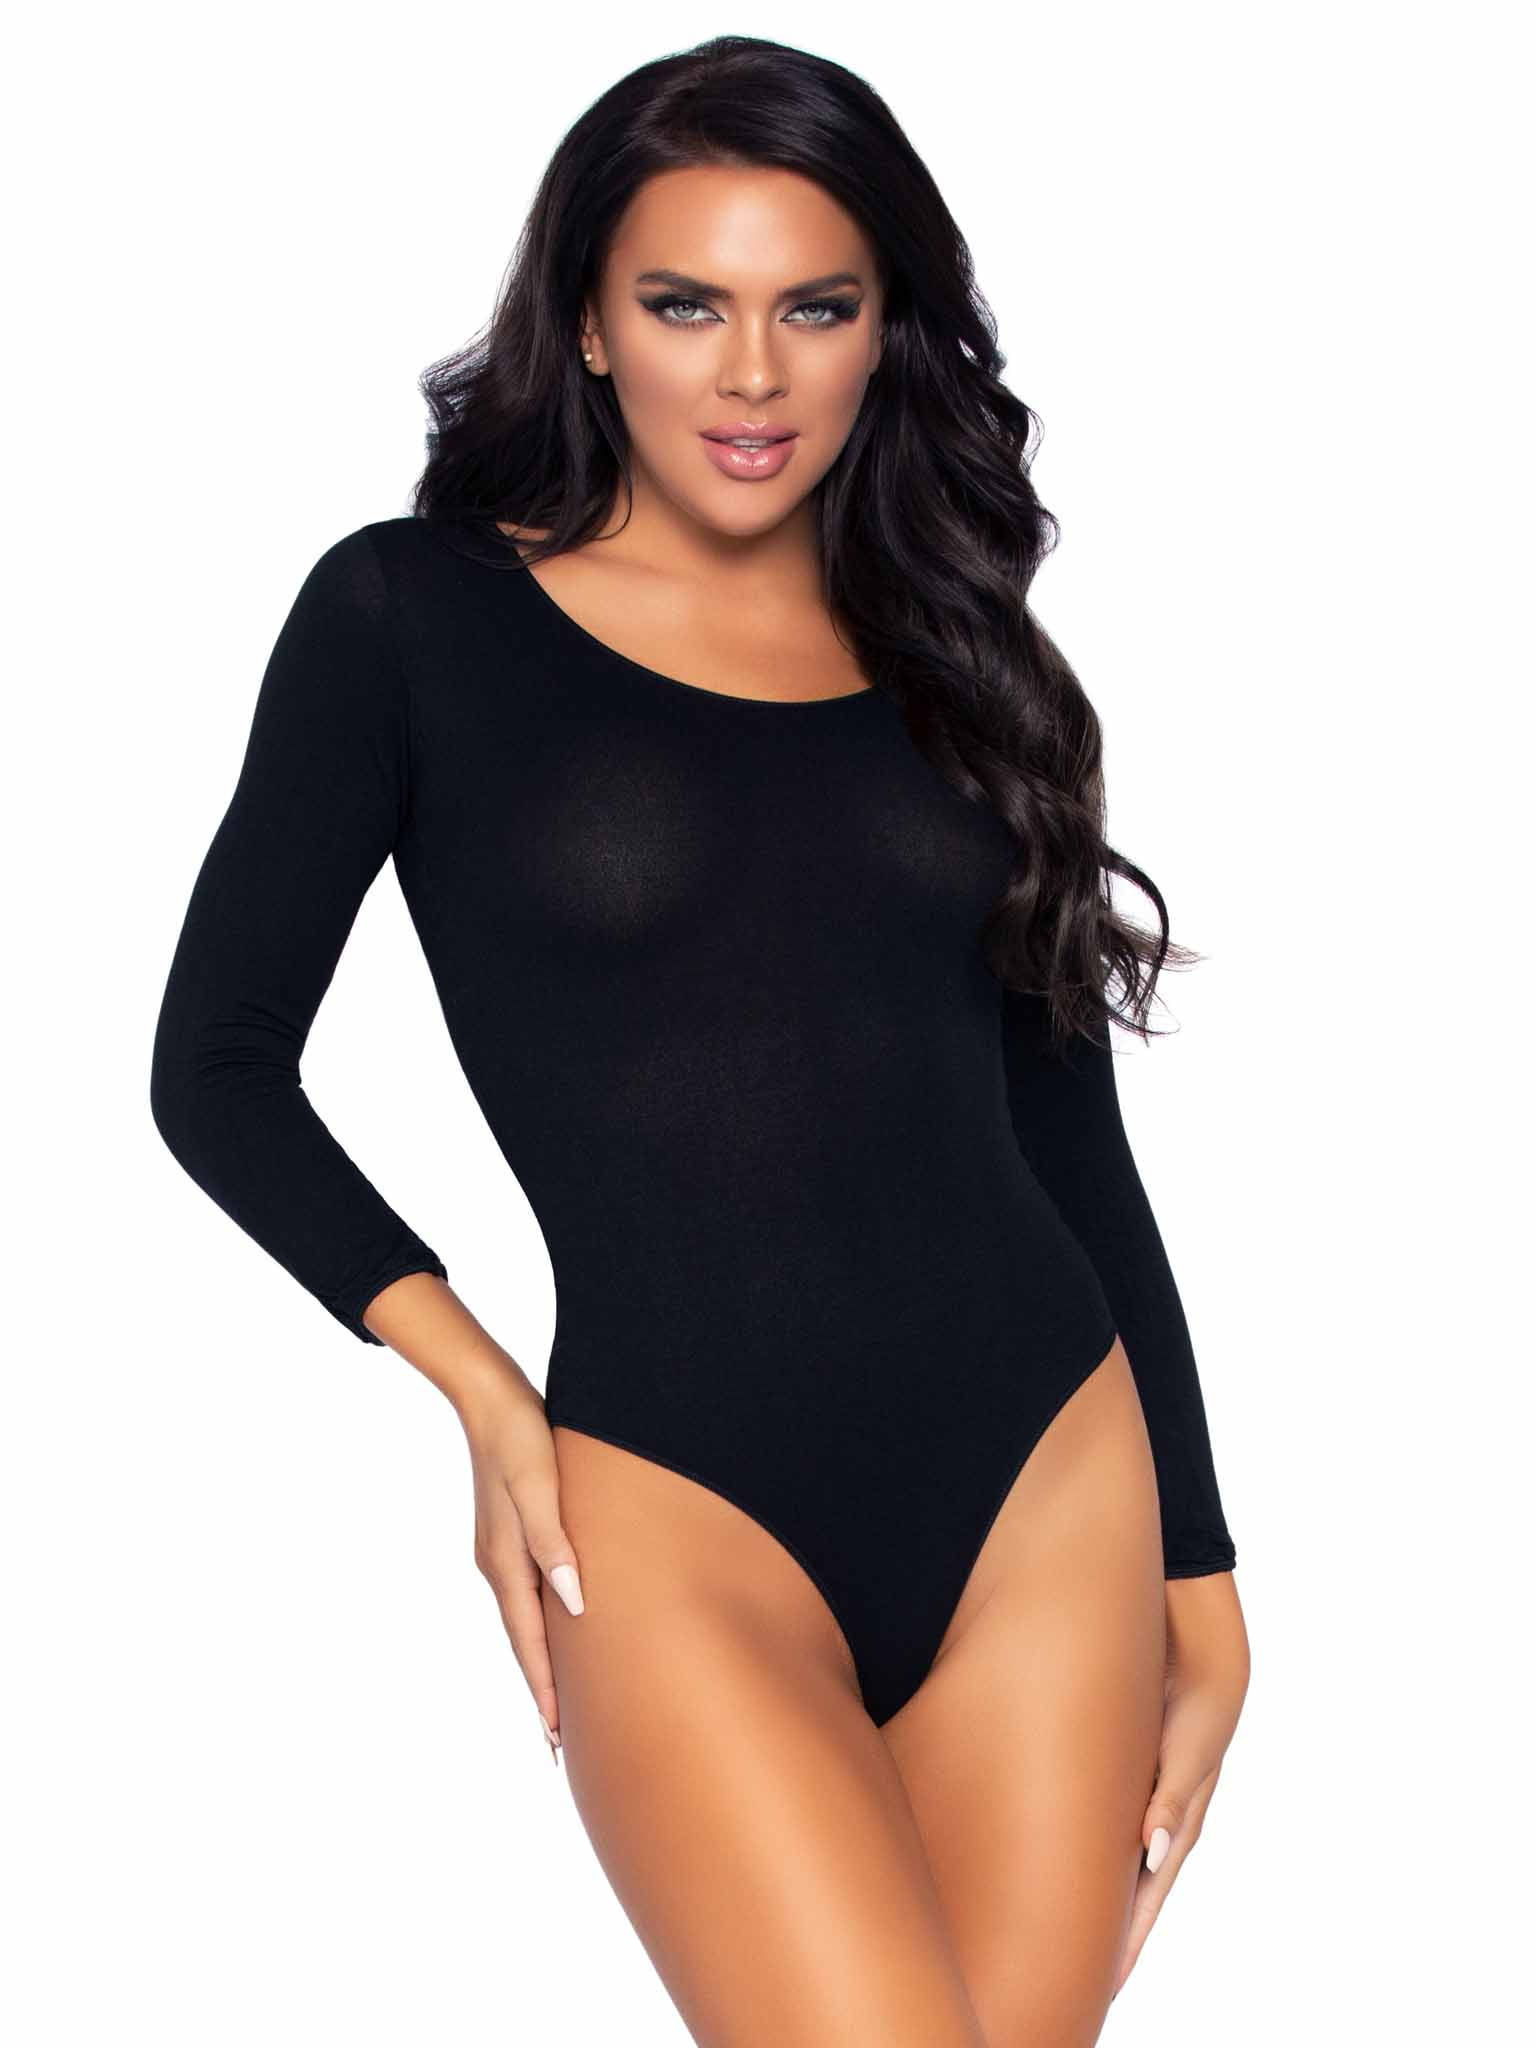 Only Hearts Second Skin Strapless Bodysuit Black 8664 - Free